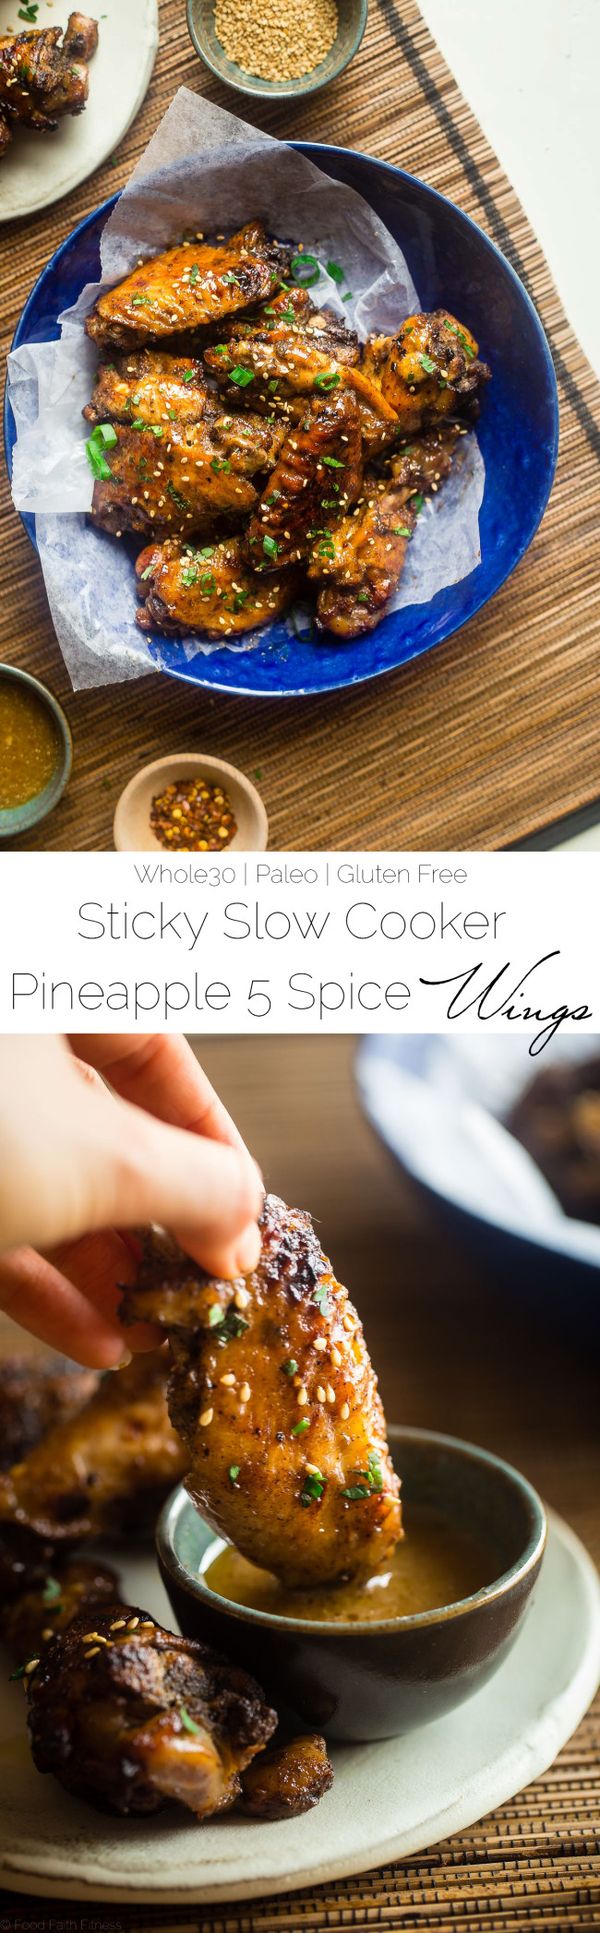 Sticky Slow Cooker Chicken Wings with Pineapple 5 Spice Sauce (Whole30 + Paleo + Super Simple